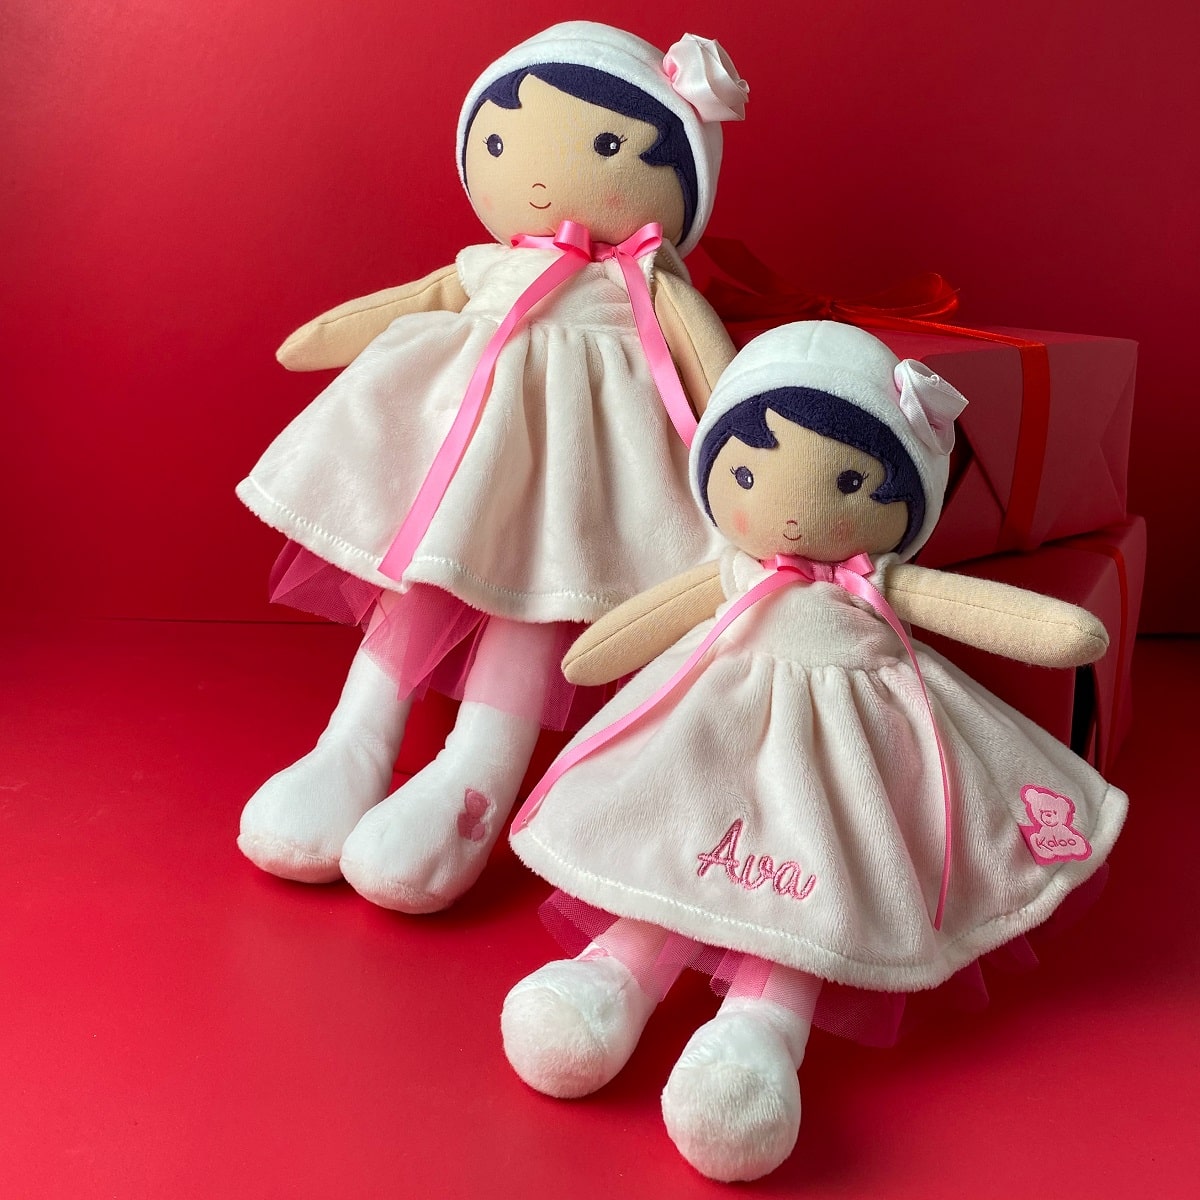 Personalised Doll Plush Toy